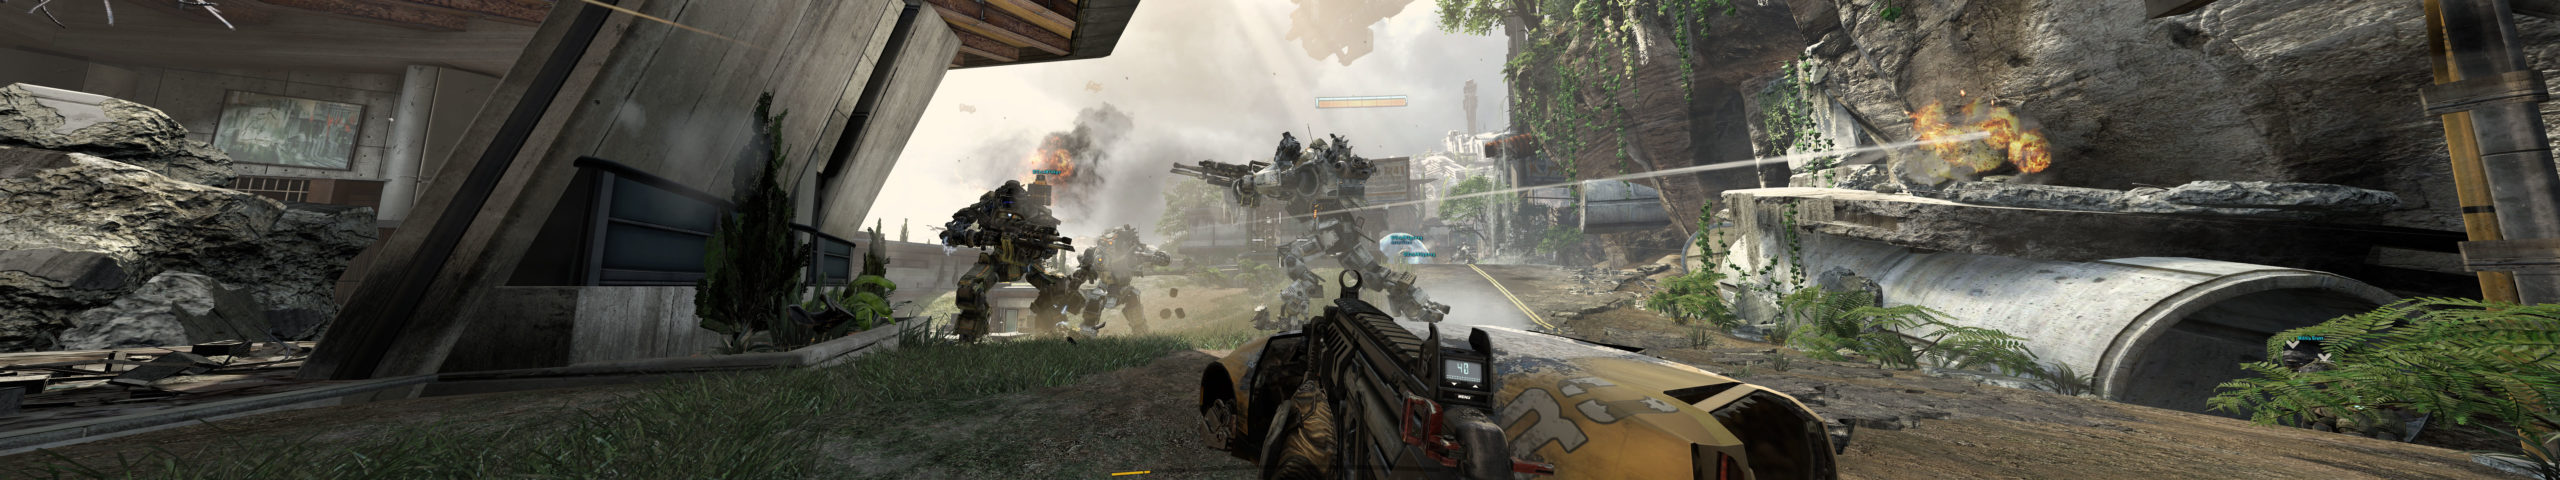 7680×1440 Titanfall Screens Are Just Being Silly